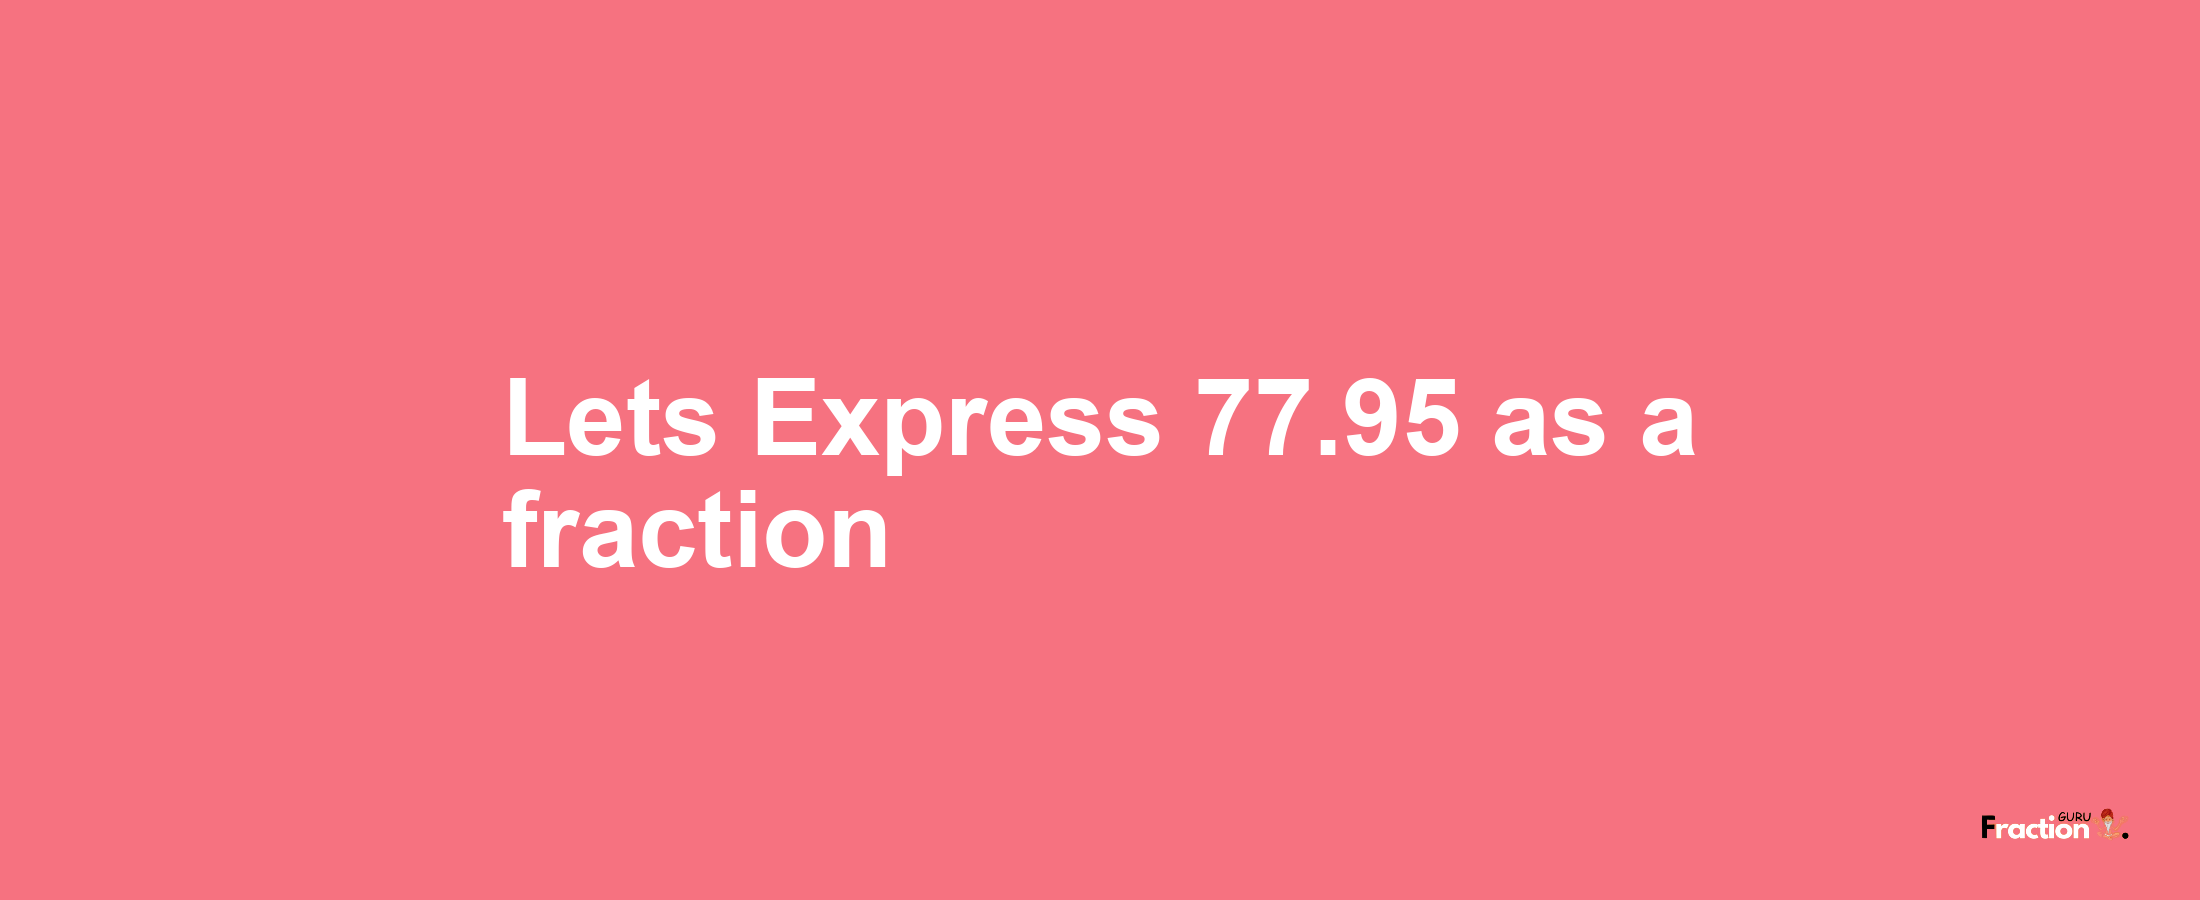 Lets Express 77.95 as afraction